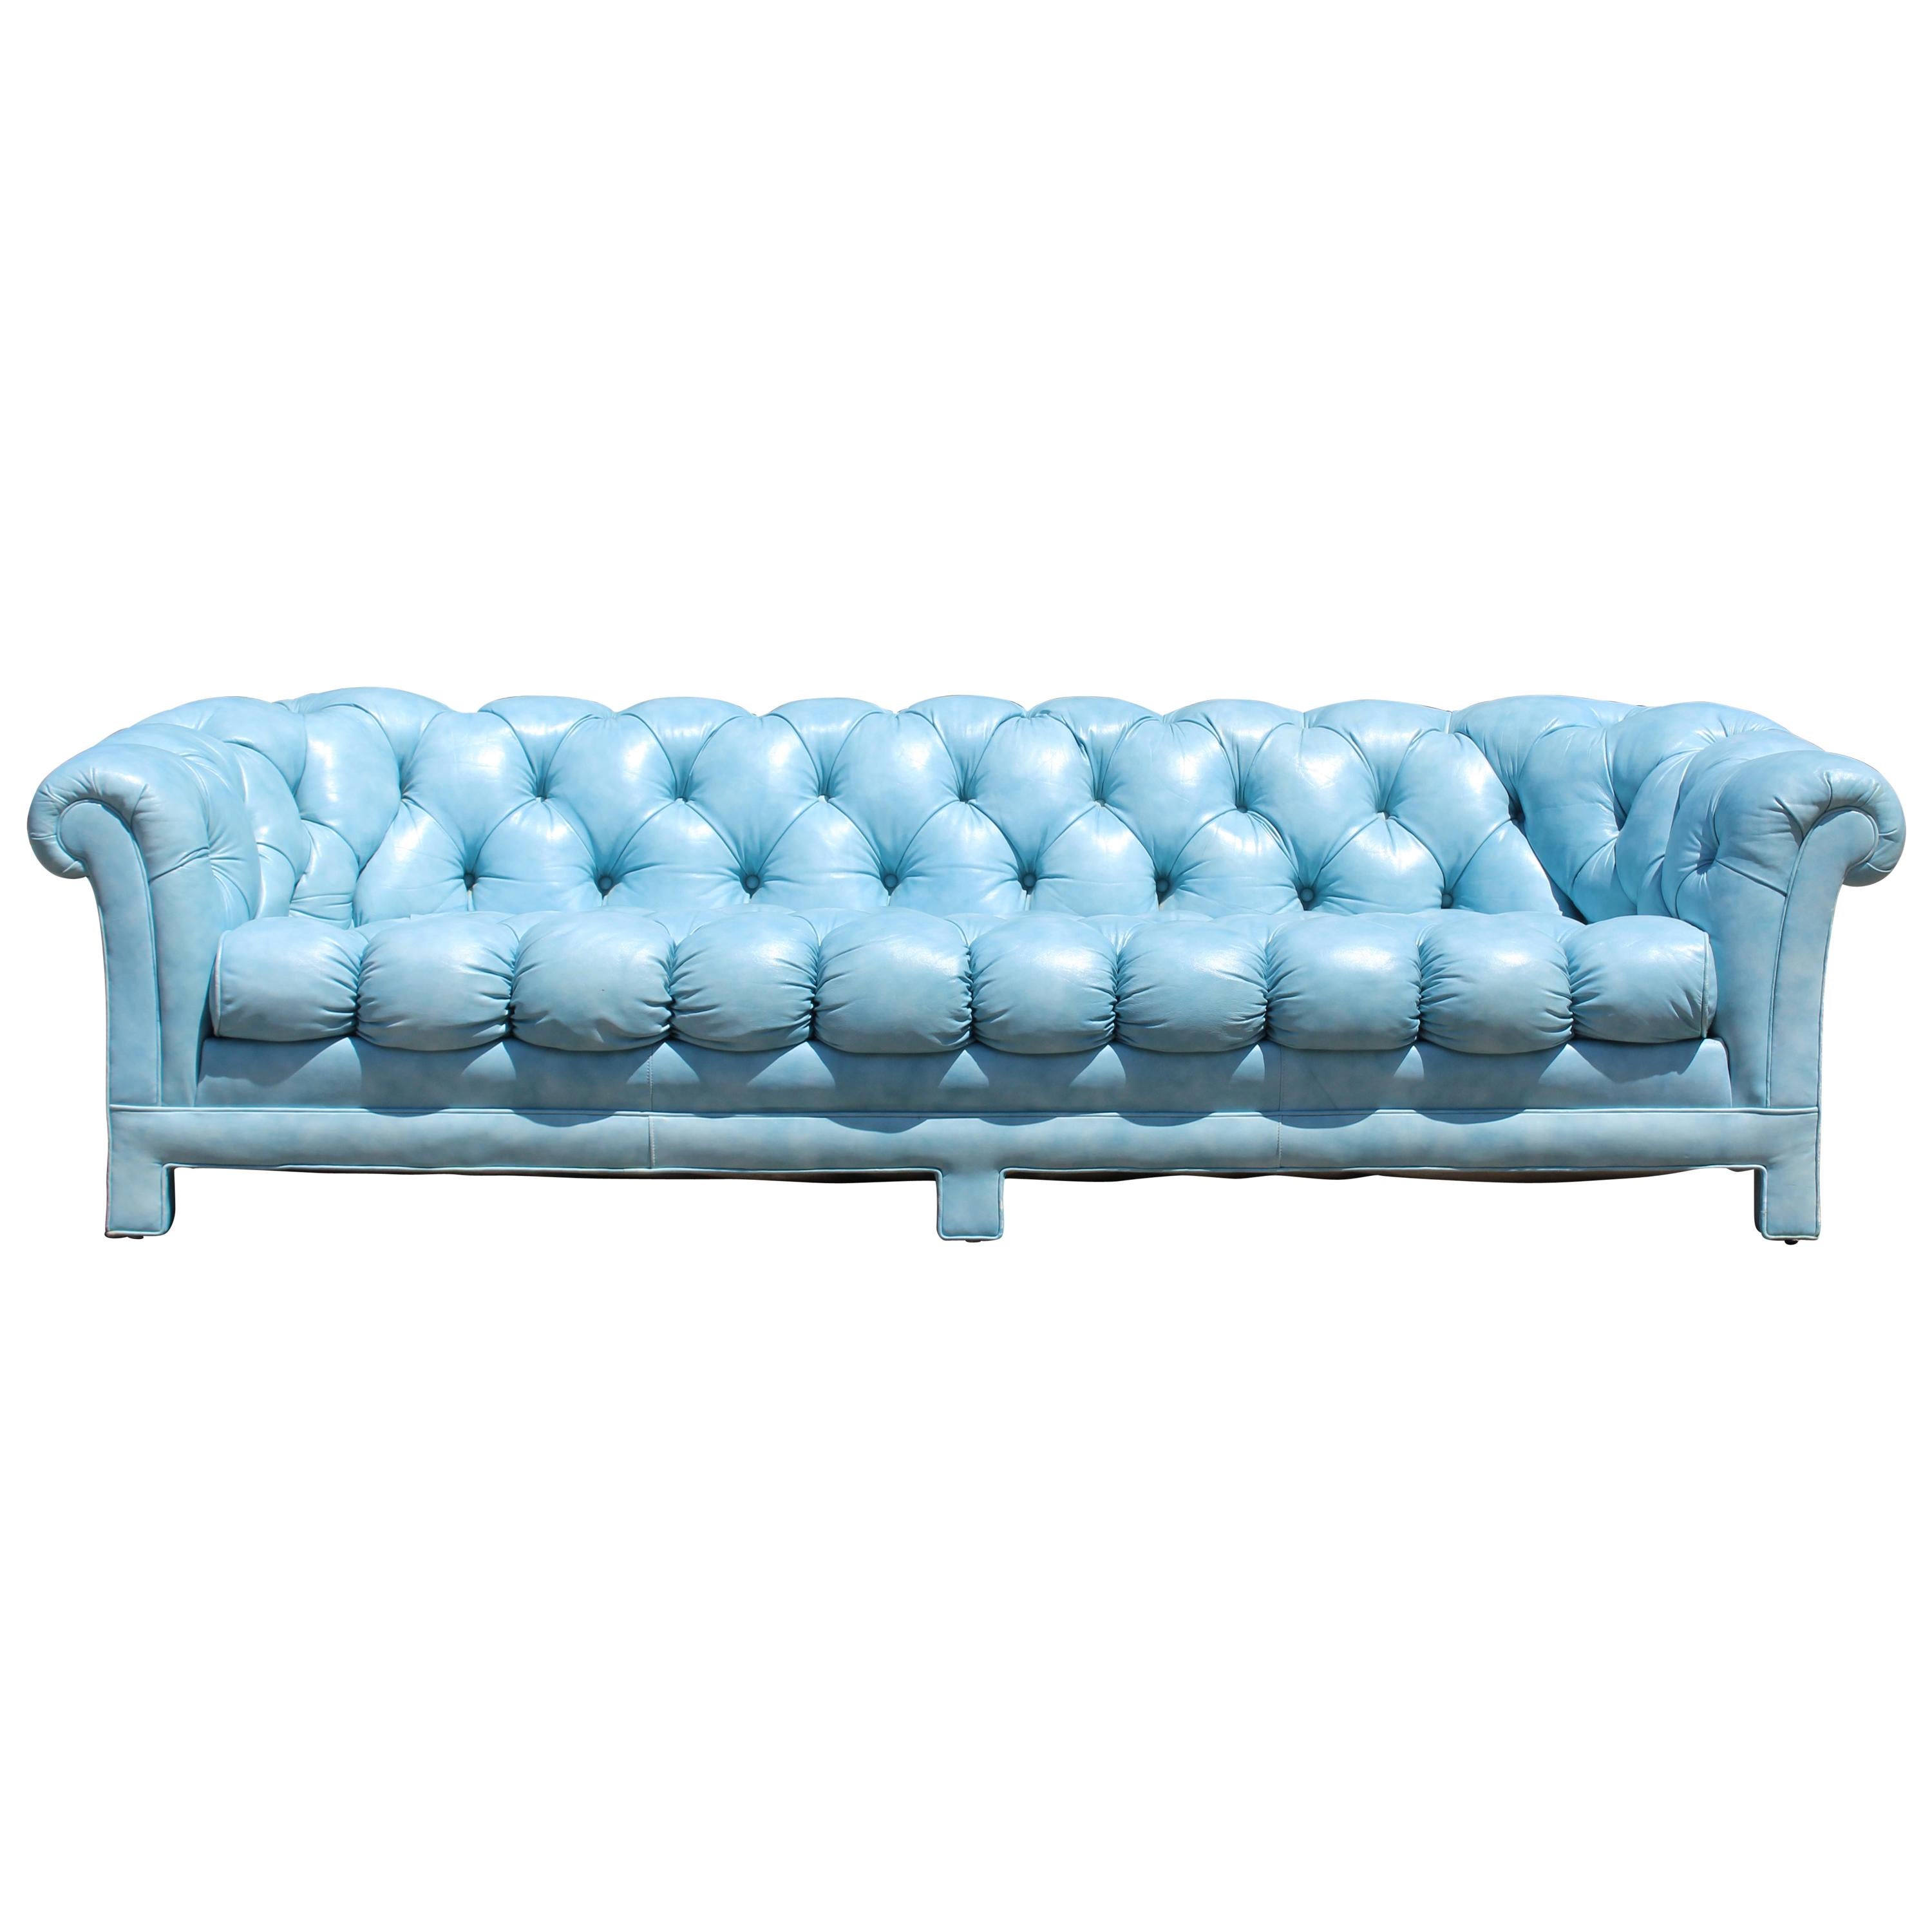 Mid-Century Modern Tufted Blue Leather Chesterfield Classic Sofa, 1970s